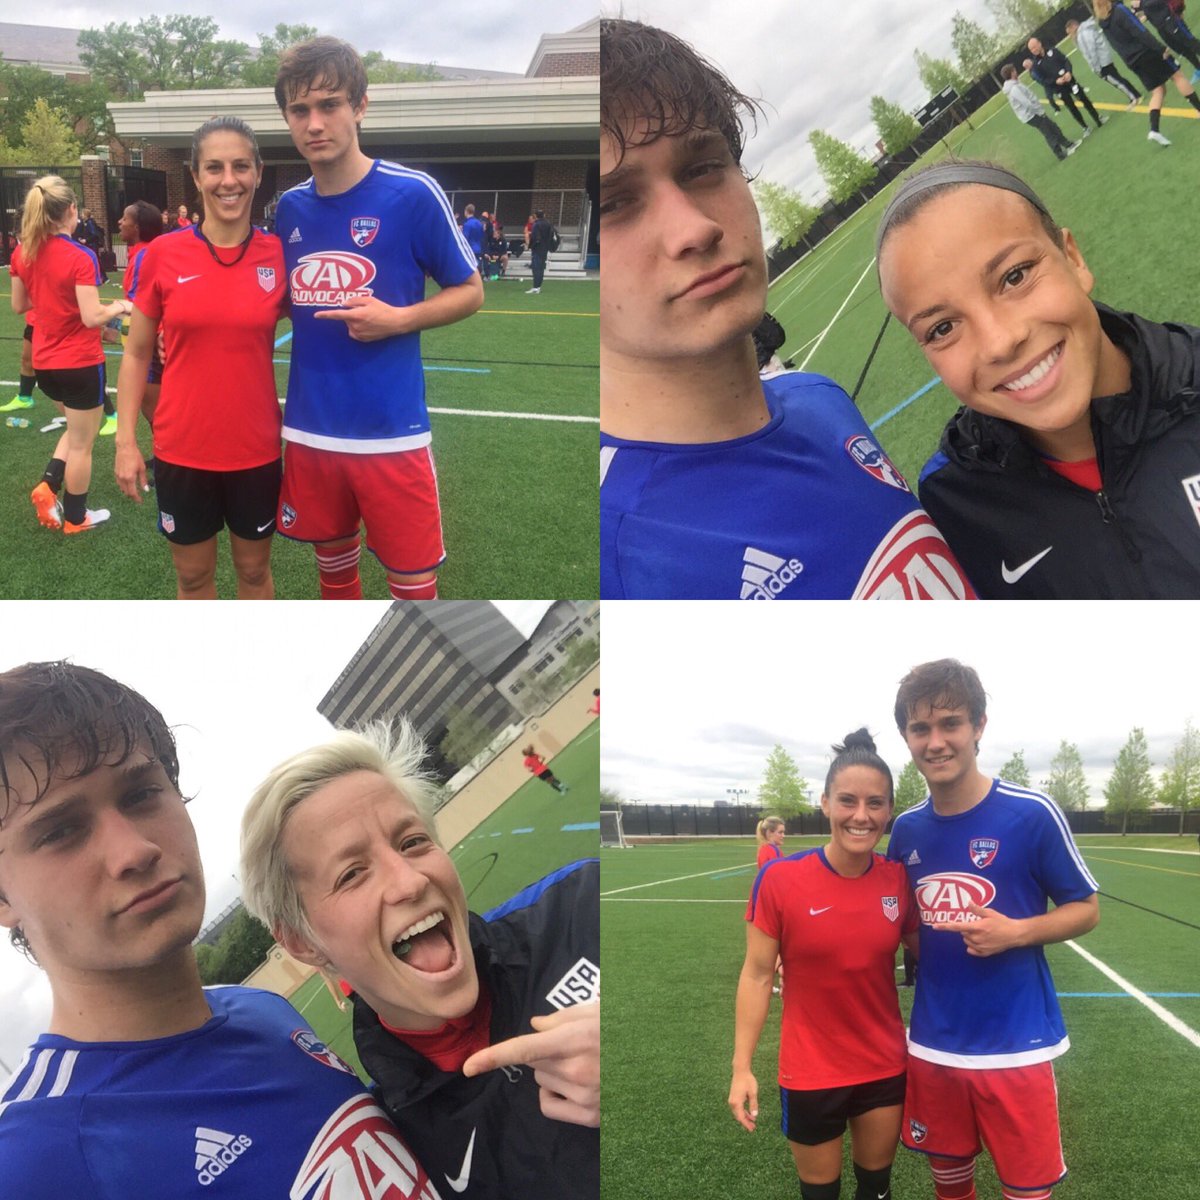 10/Look at this...The U.S. women's soccer team that won the last world cup was beat 5-2 by a group of *14 YEAR OLD BOYS* Look at the size difference in these pictures. The 14 year old boy dwarfs the women.That doesn't disappear if he comes out as trans.